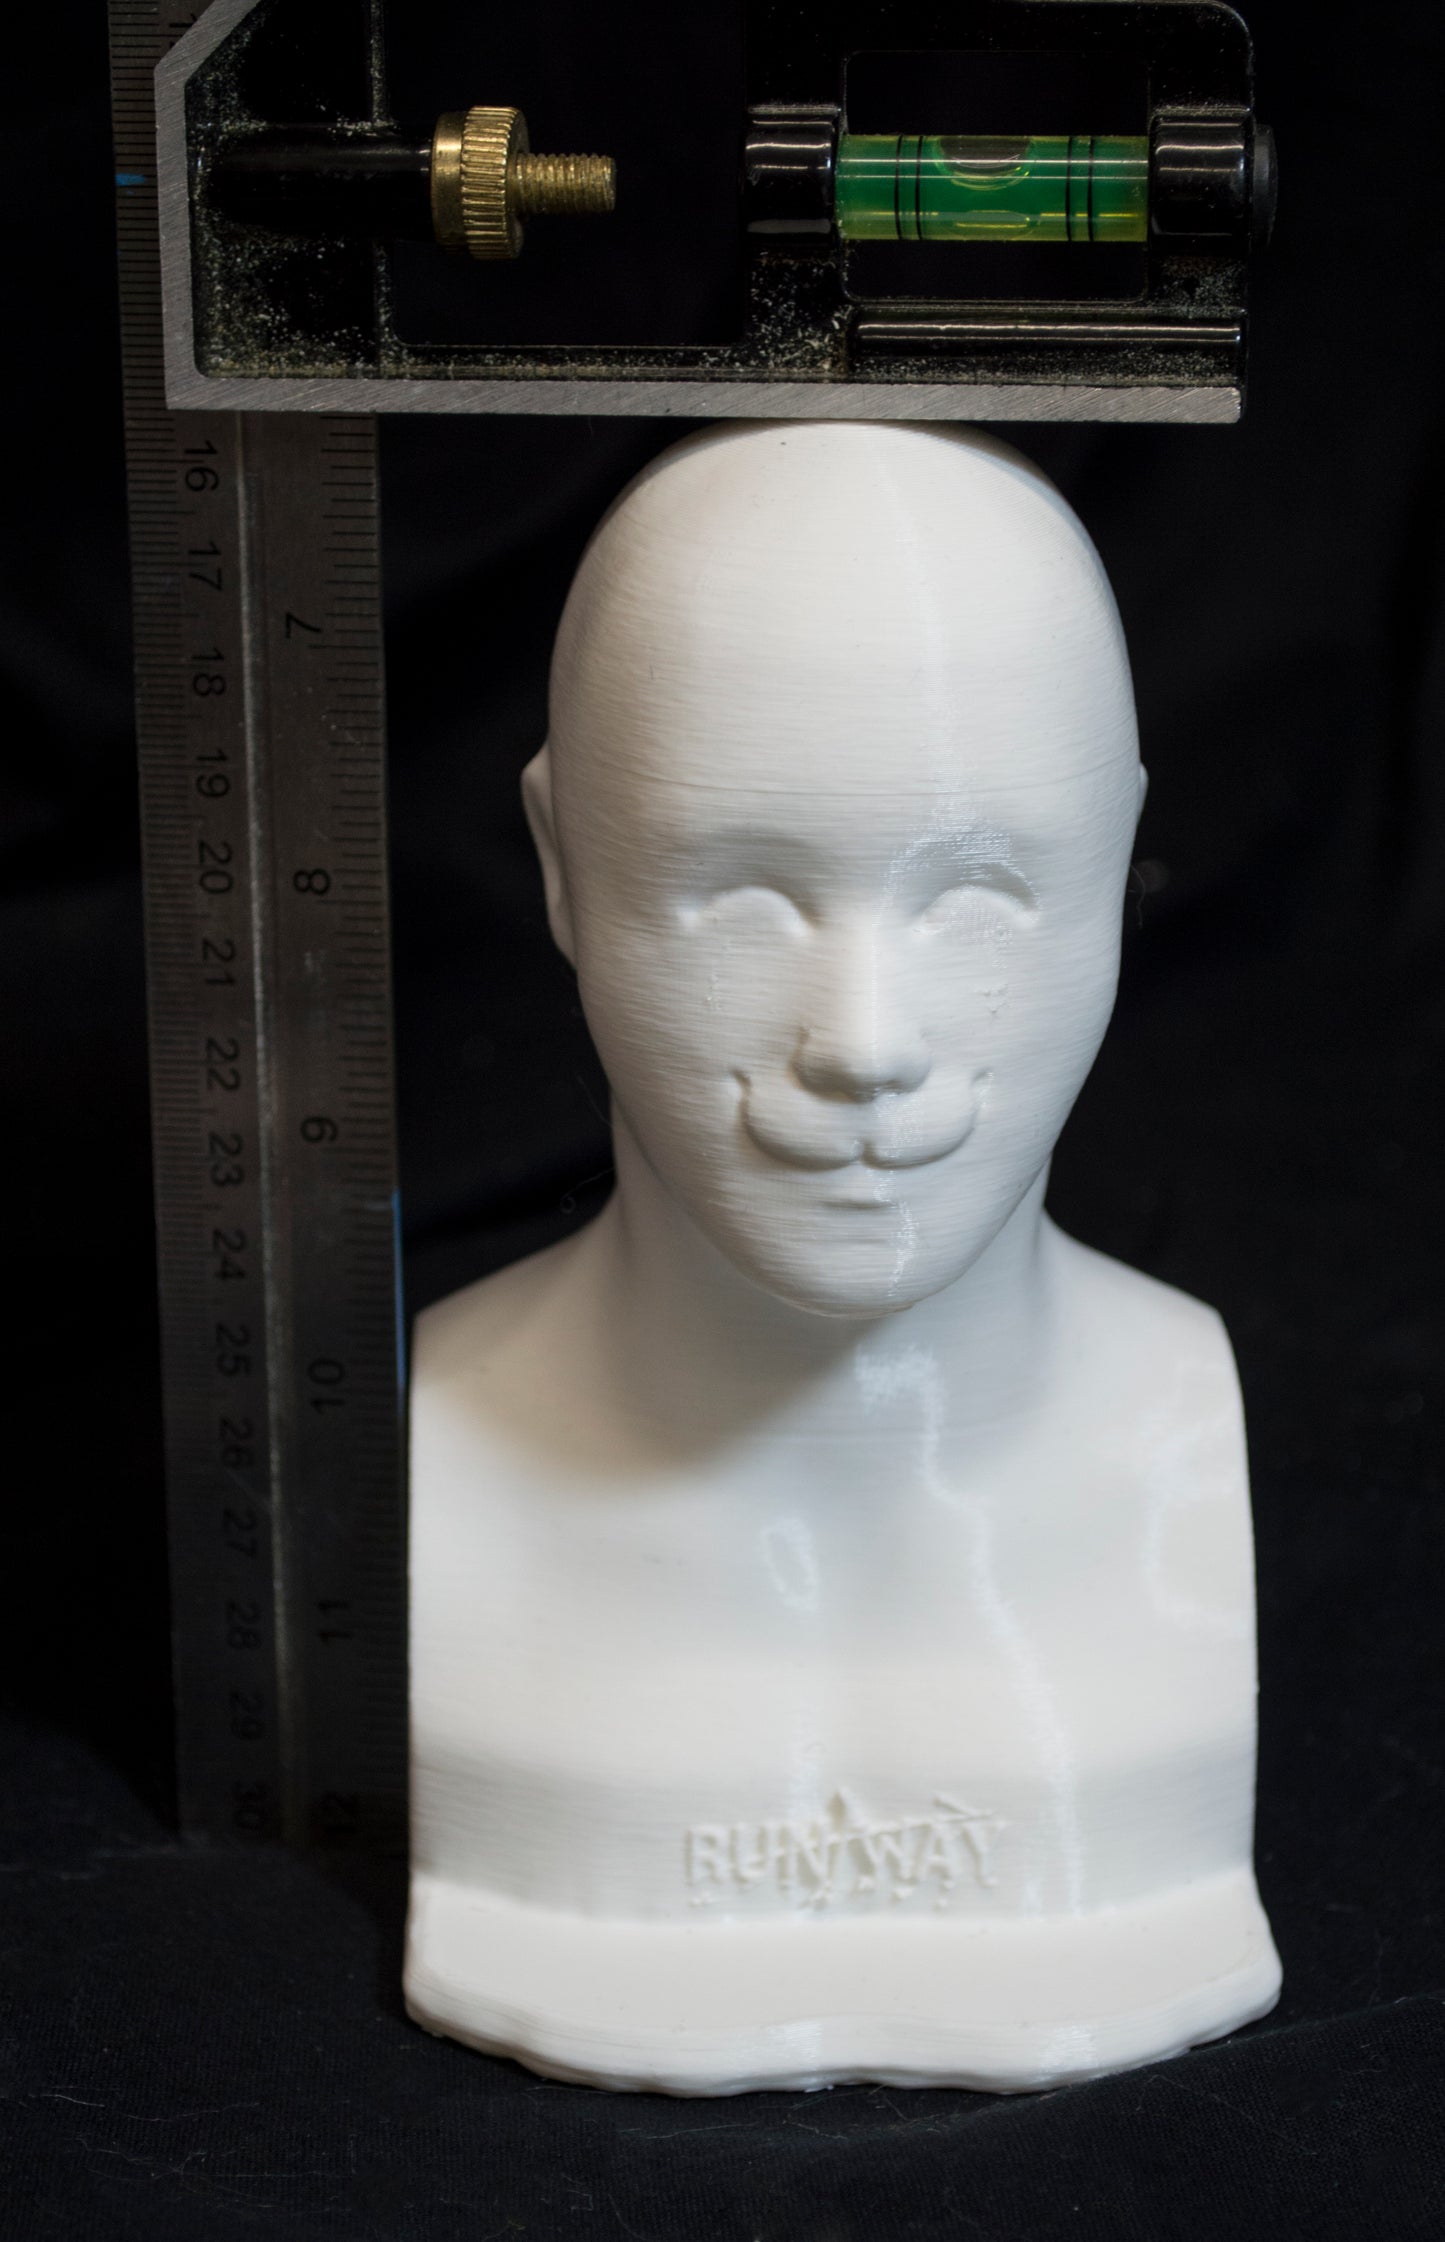 Mini head Armature (1/3 size) for sculpting and patterning